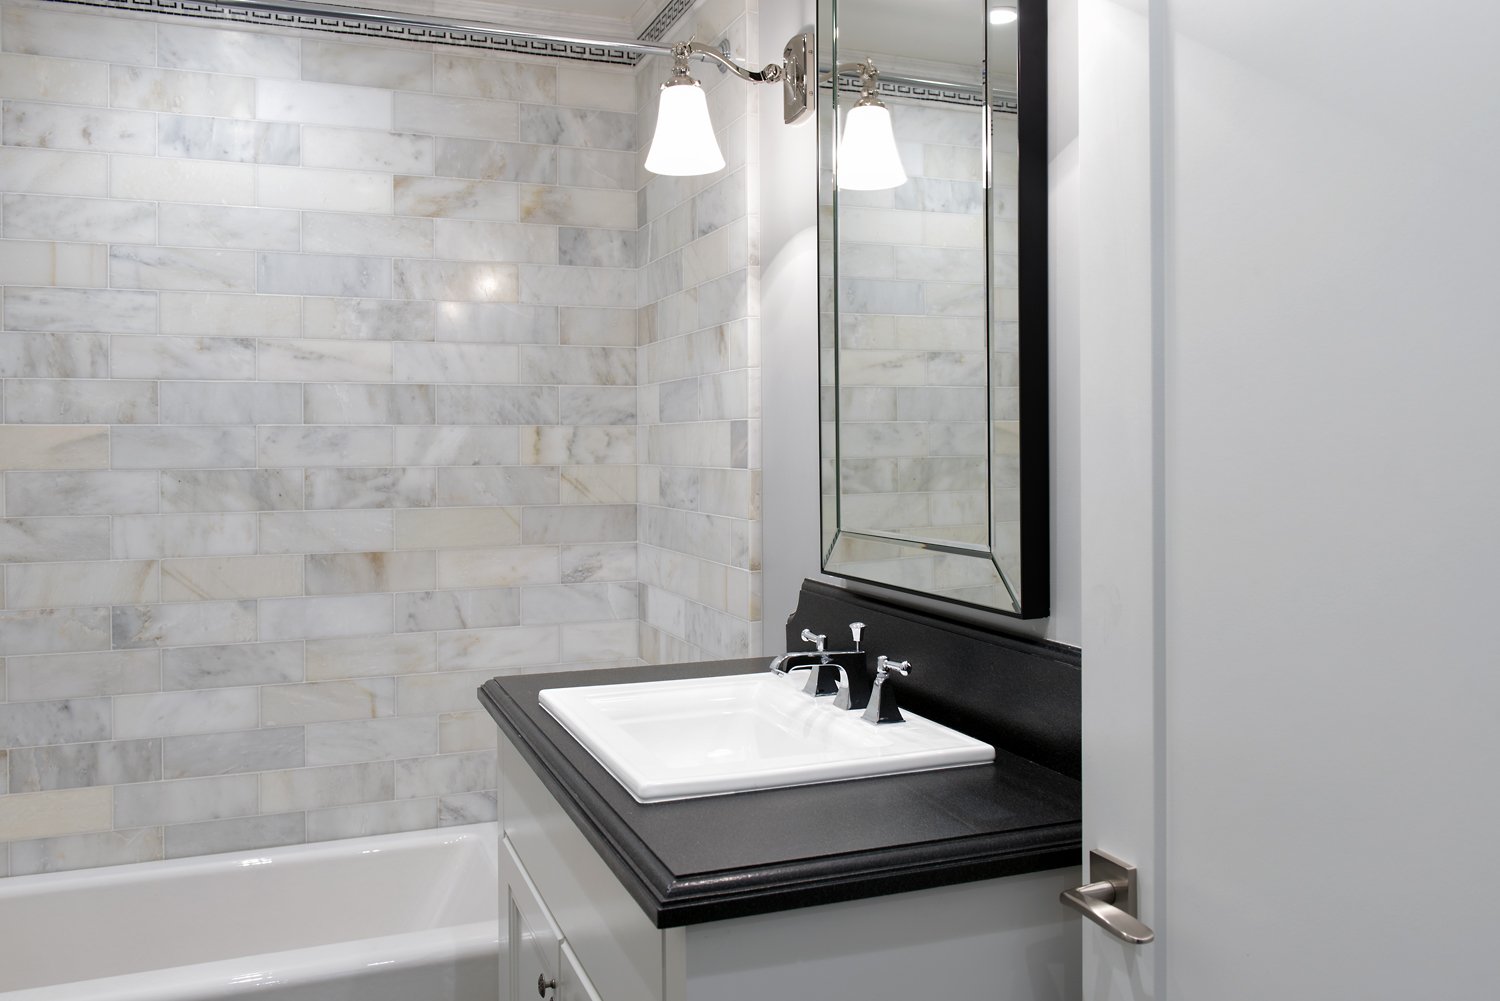  Bathroom vanity with a black countertop and silver fixtures.  